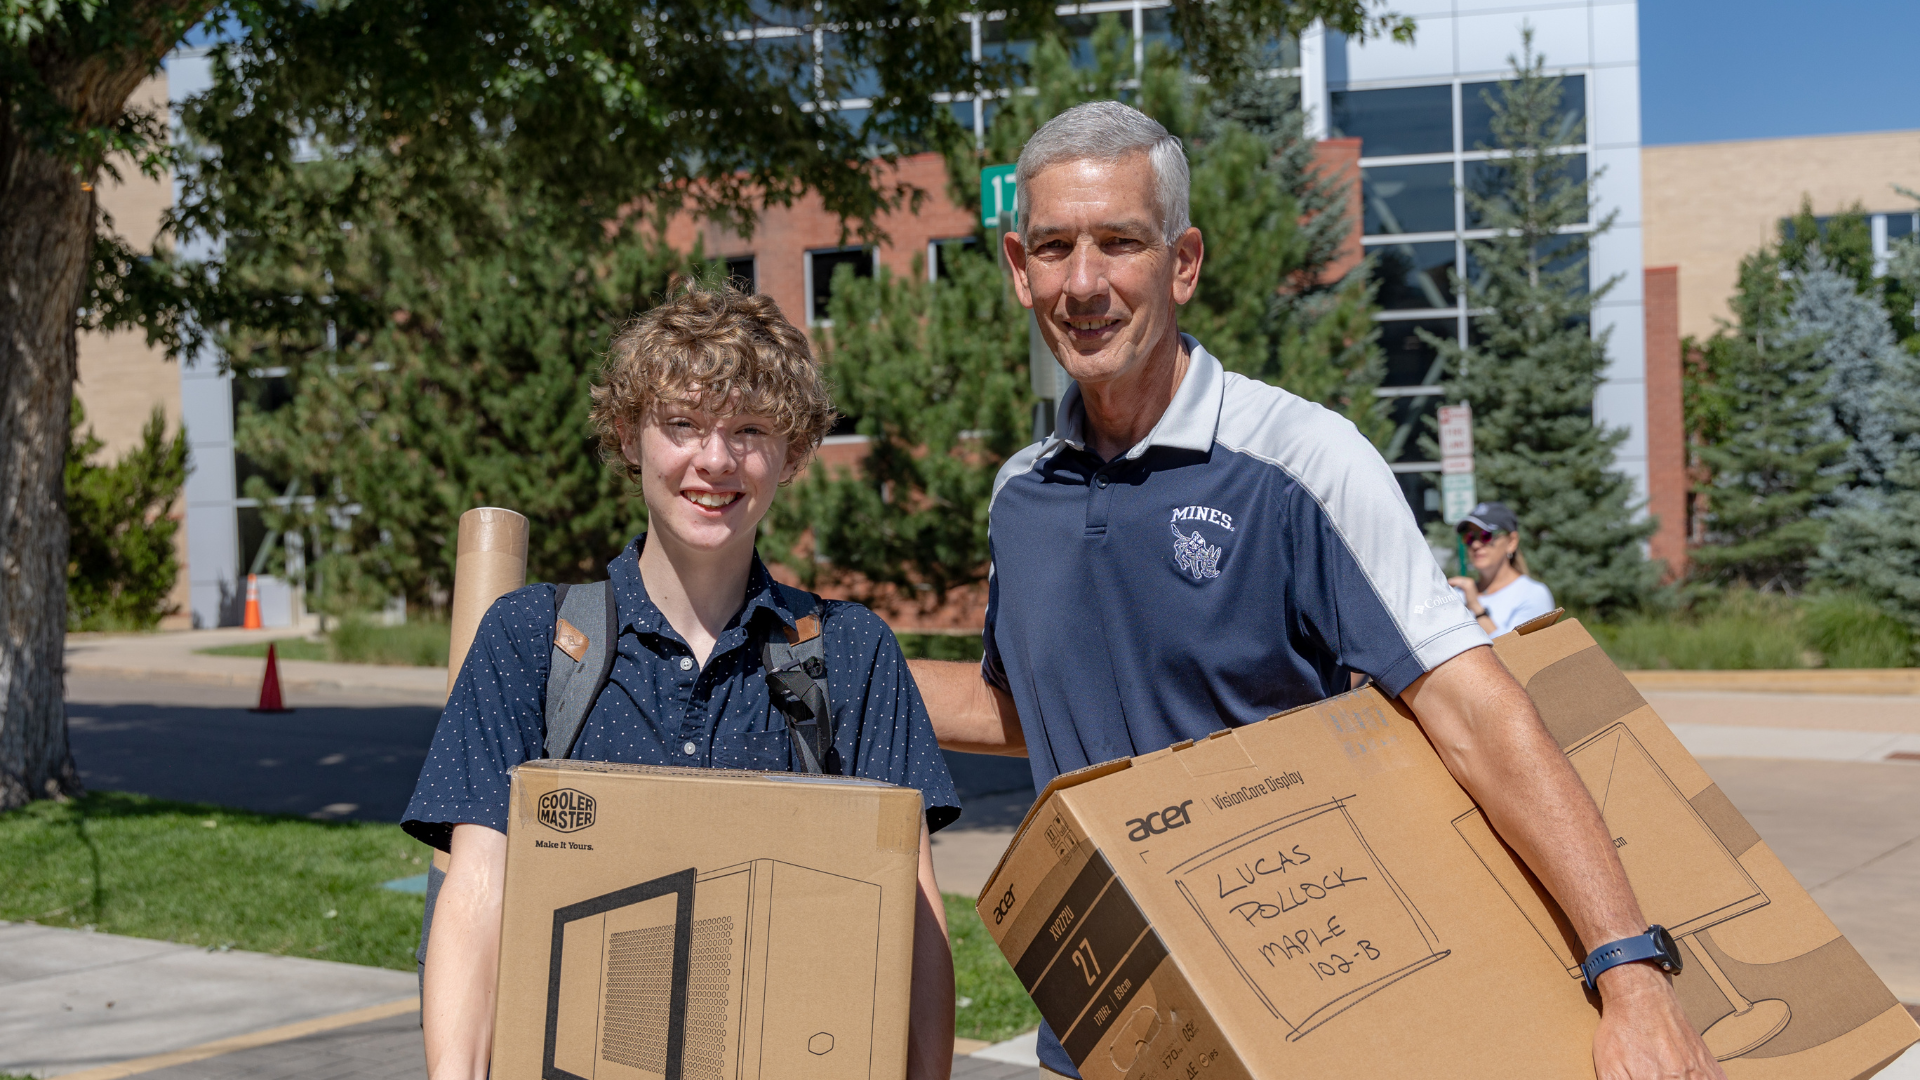 Two students pose while helping move first year students into campus